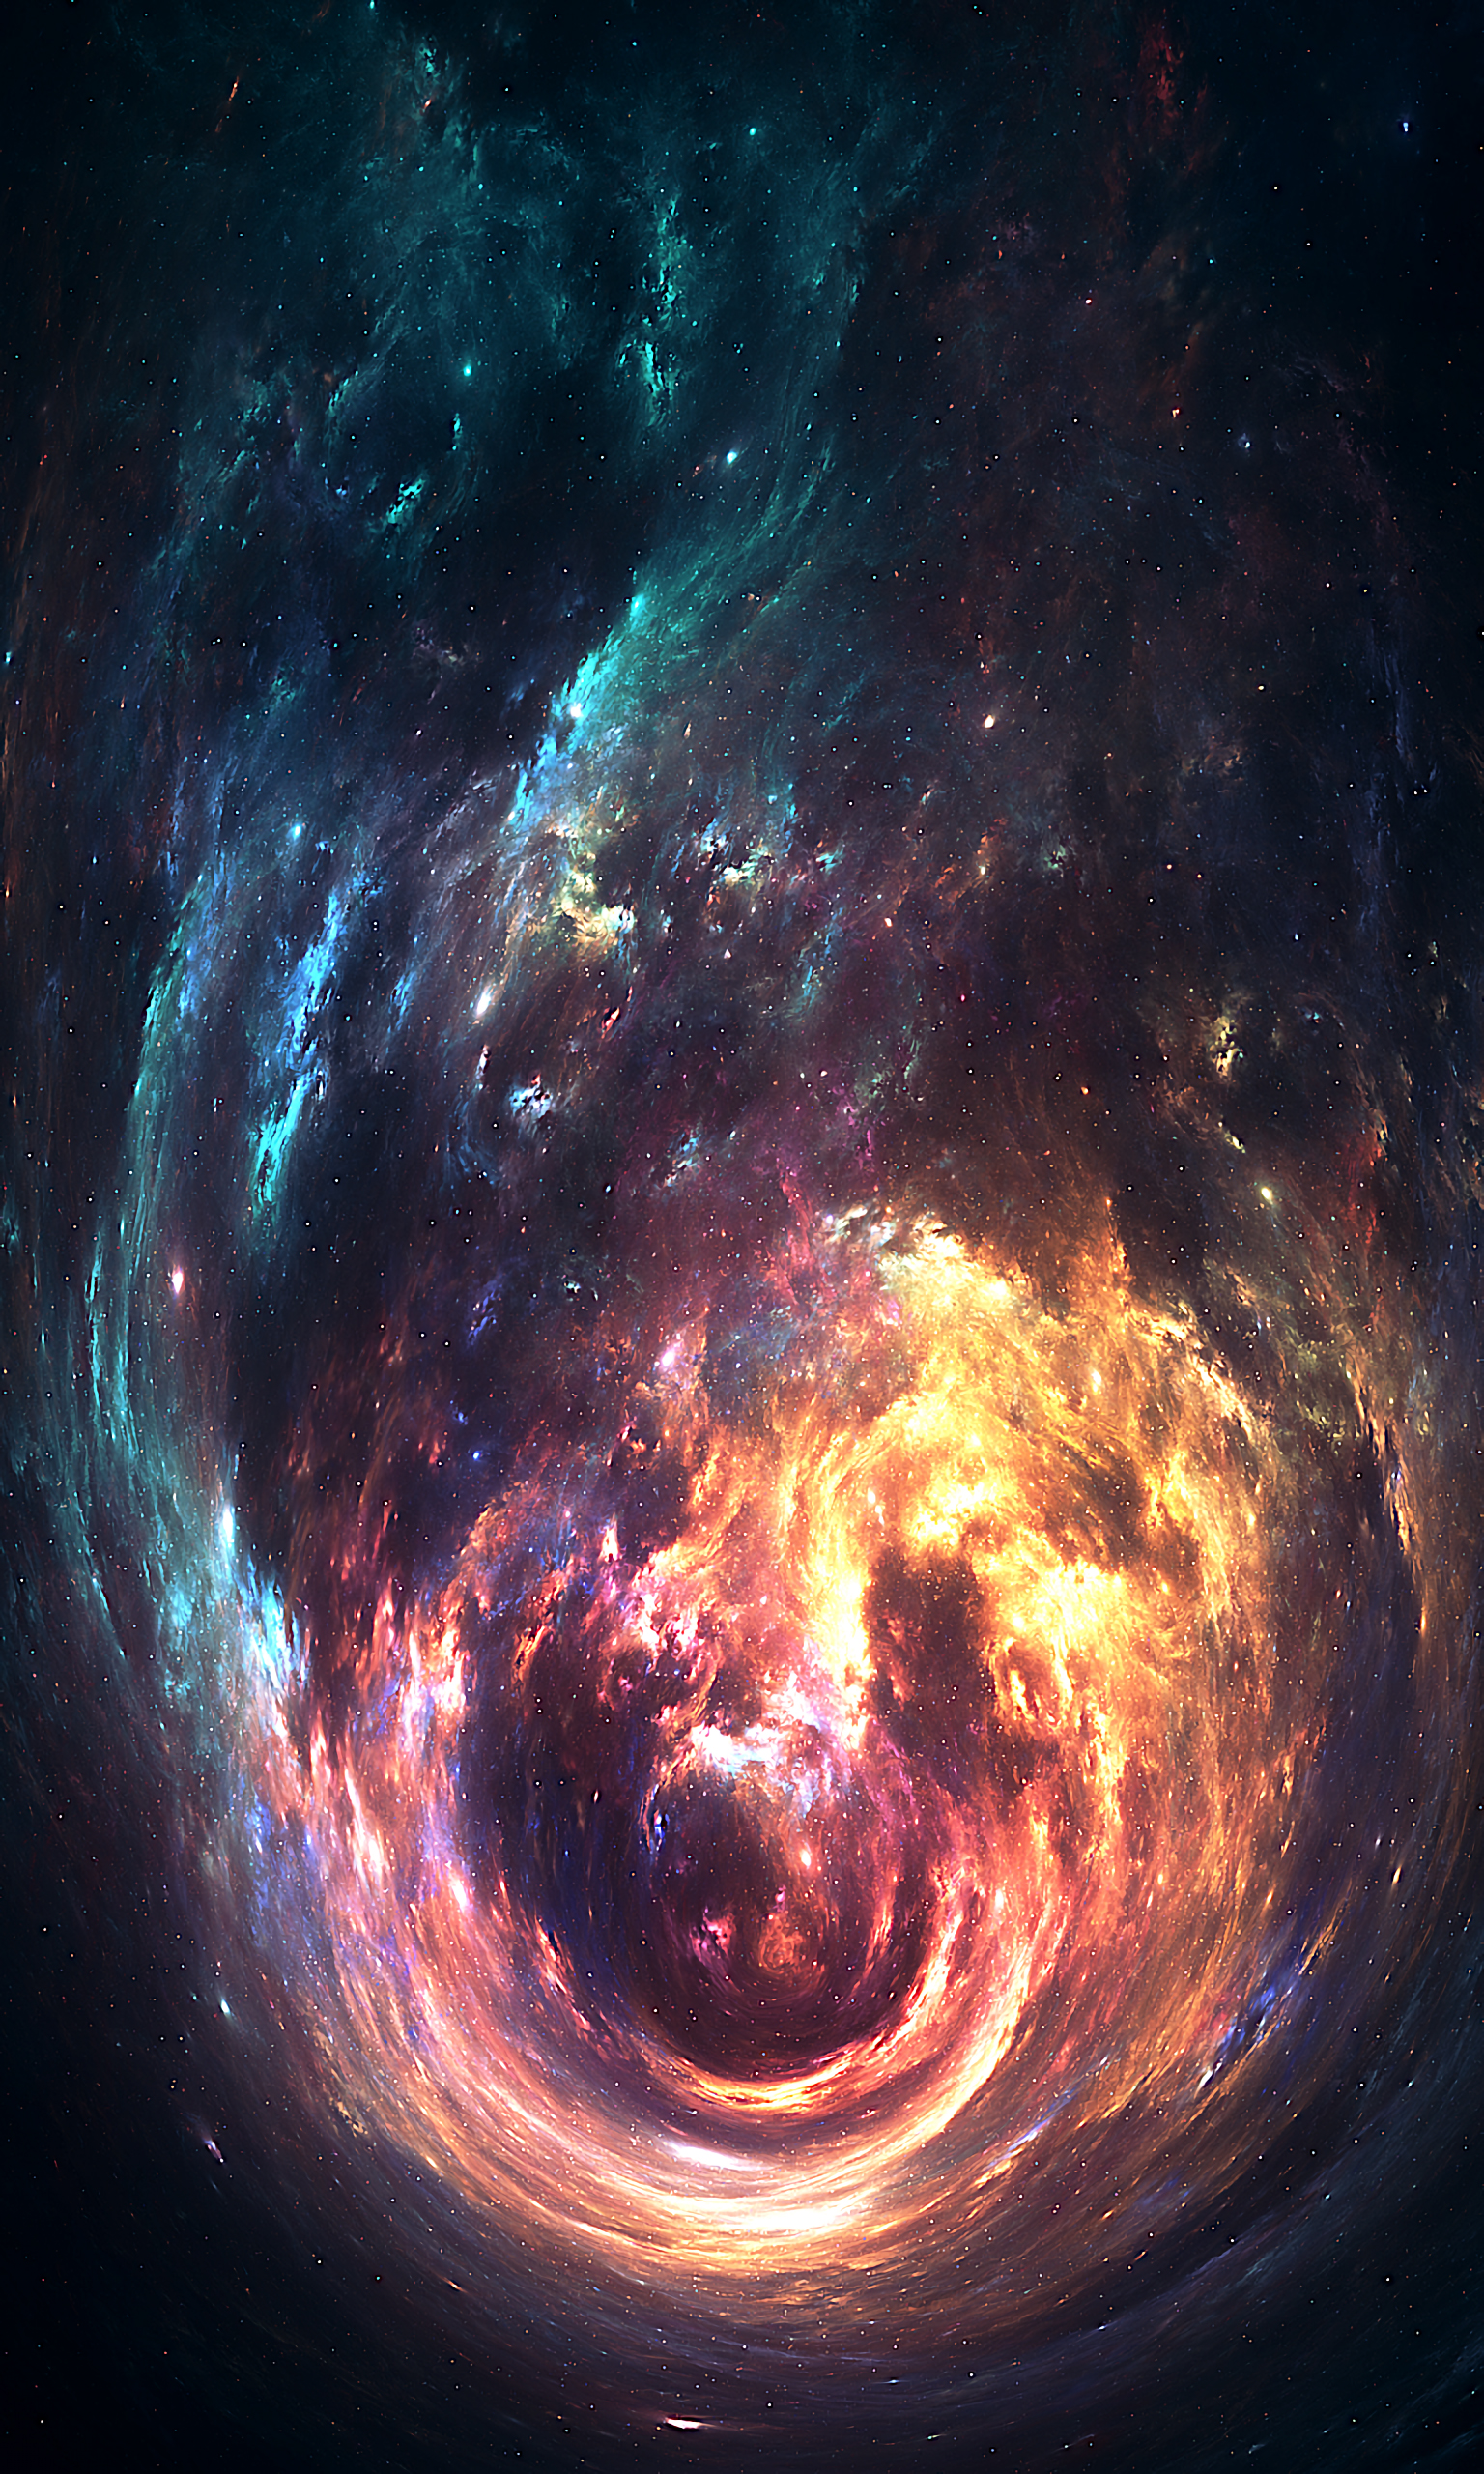 bright, abstract, nebula, cloud, flaming, swirling, involute, fiery